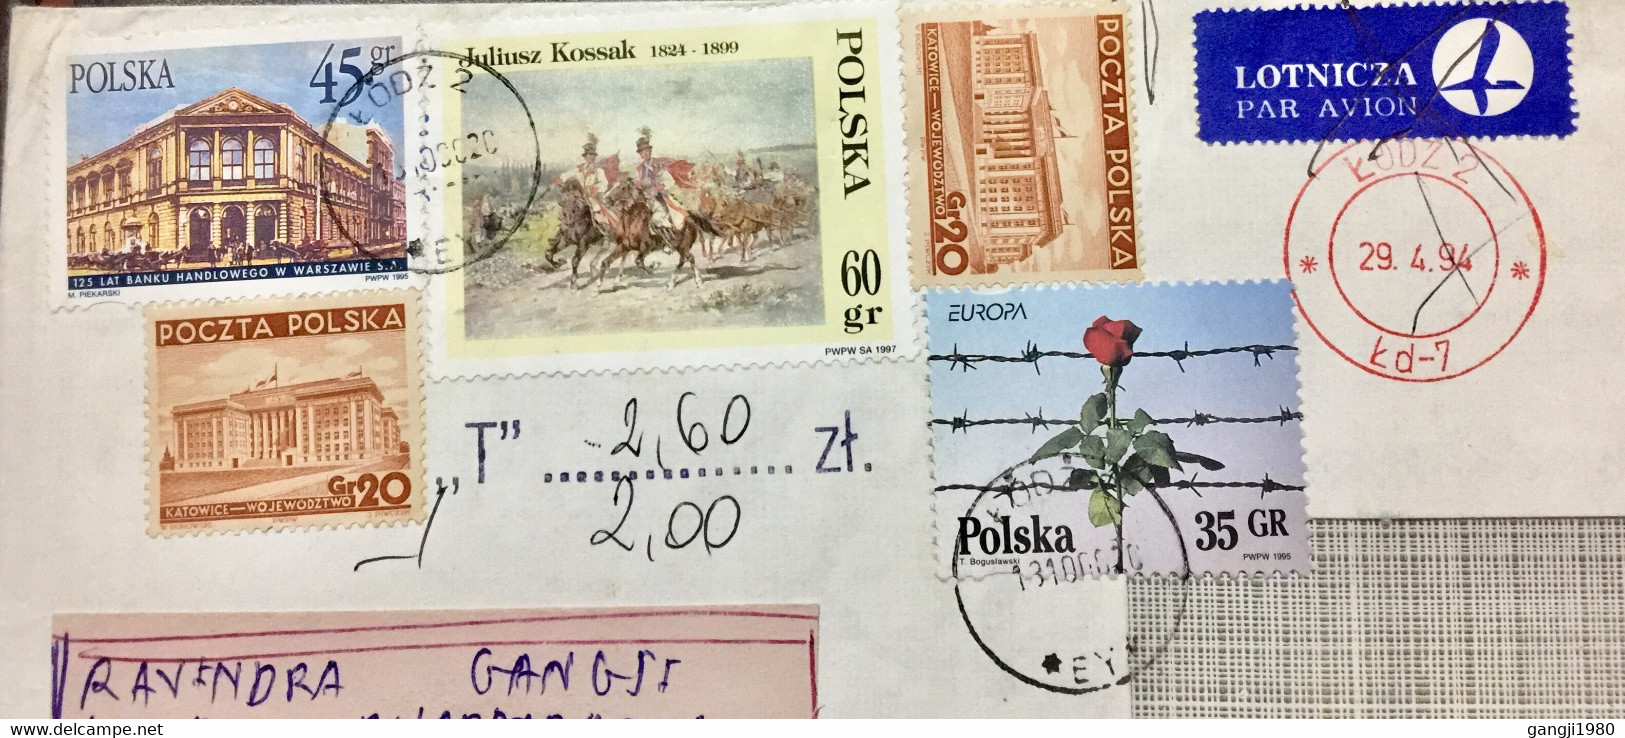 POLAND 2000 ,AIRMAIL METER FRANKED 1994, REUSED COVER EARLY STAMP REJECTED SU DUE “T” 260 ZT, BUILDING,HORSE,FLOWER,PLAN - Briefe U. Dokumente